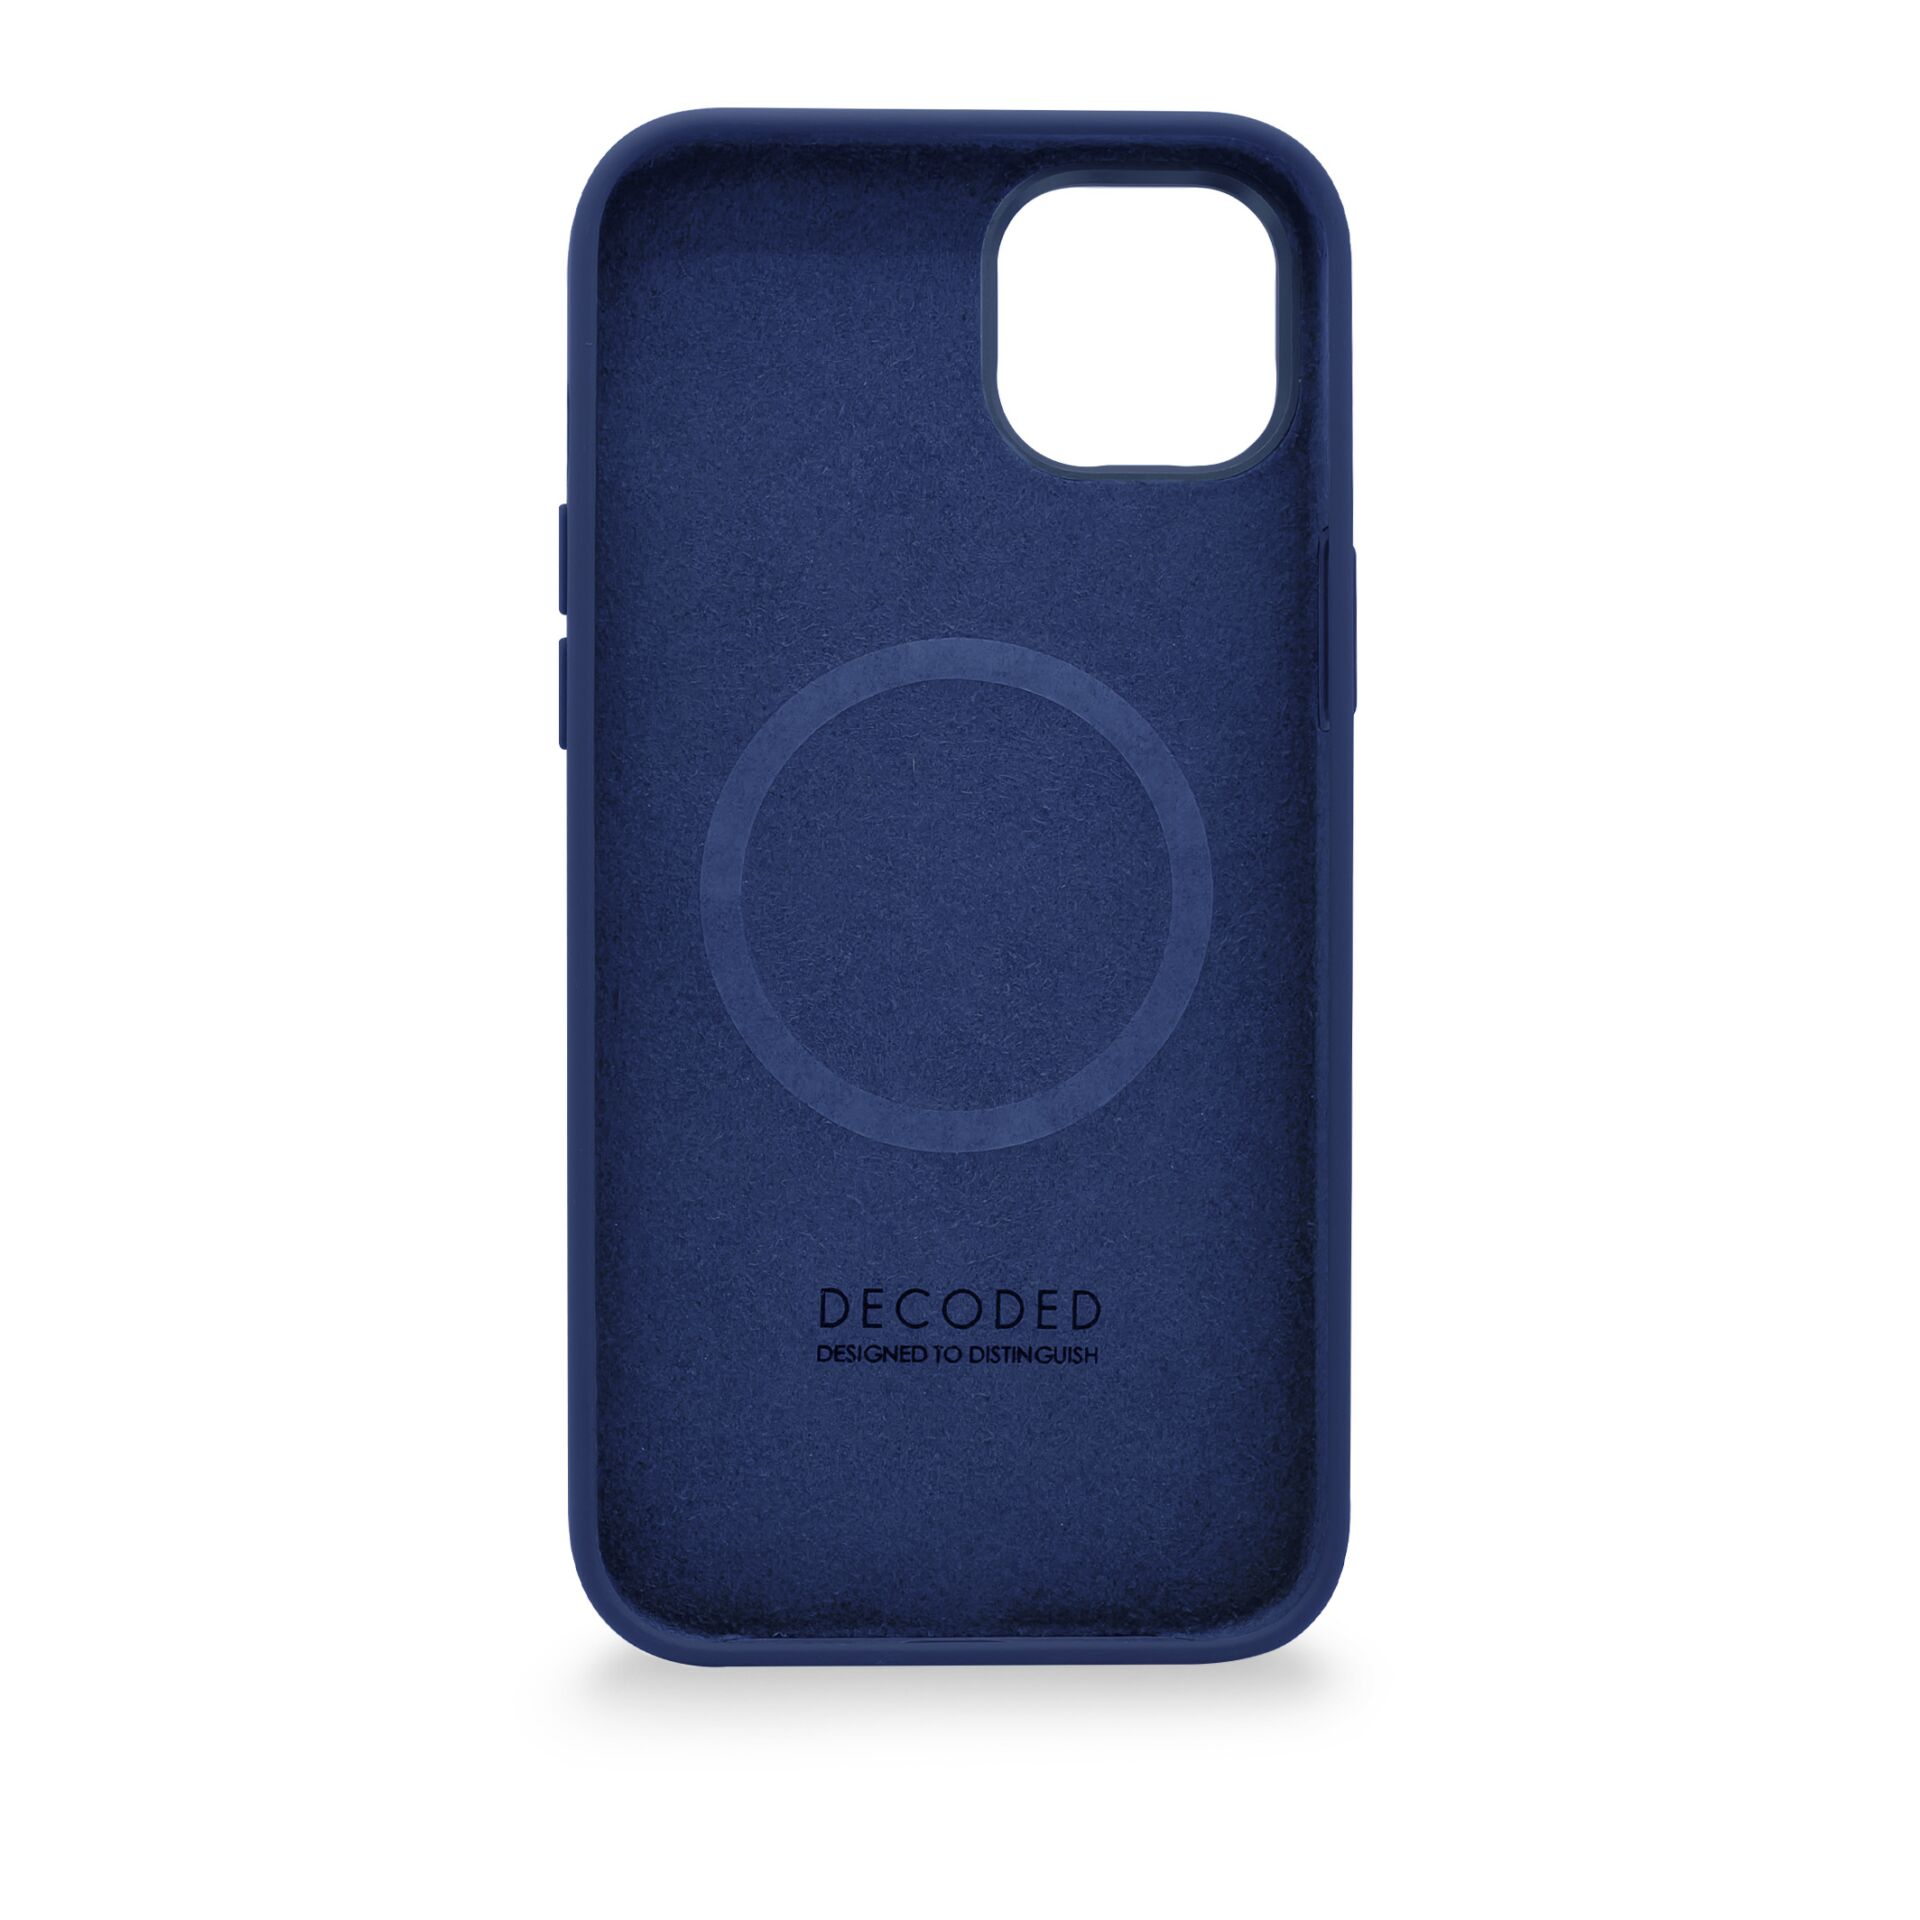 DECODED AntiMicrobial Silicone Corn Backcover Pro, Corn, iPhone Apple, Backcover, Sweet 14